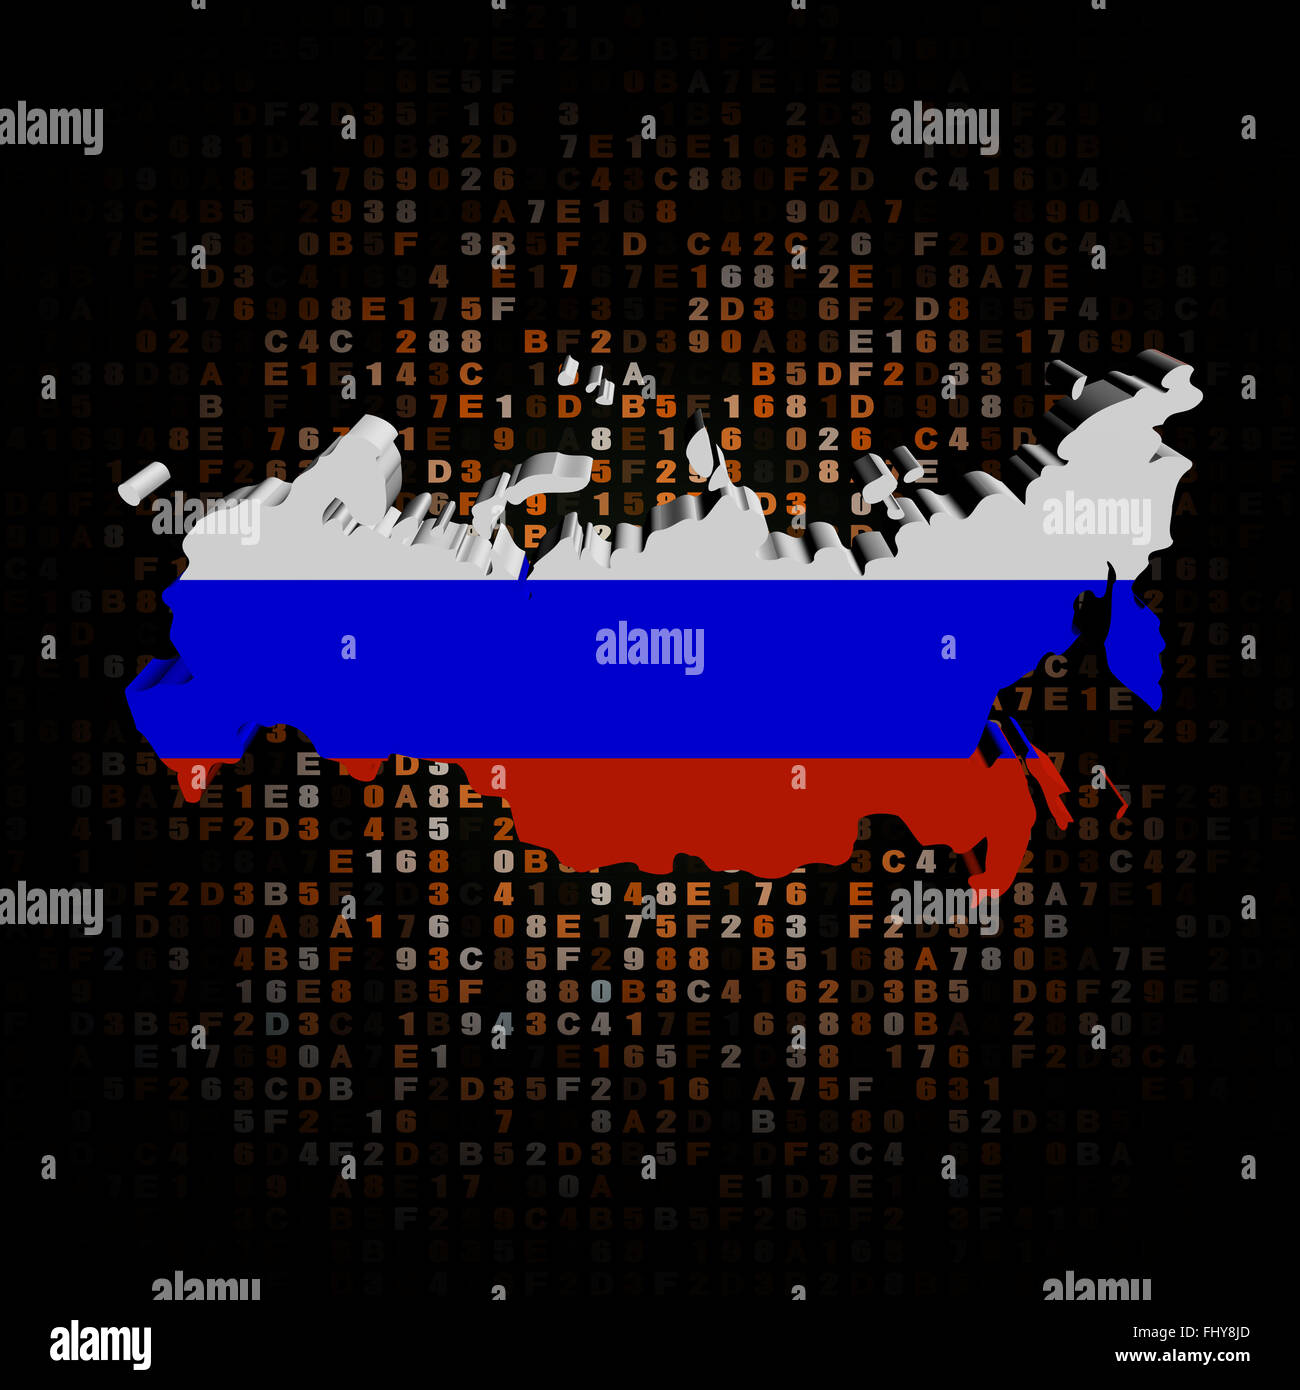 Map and flag of Russia Stock Photo - Alamy